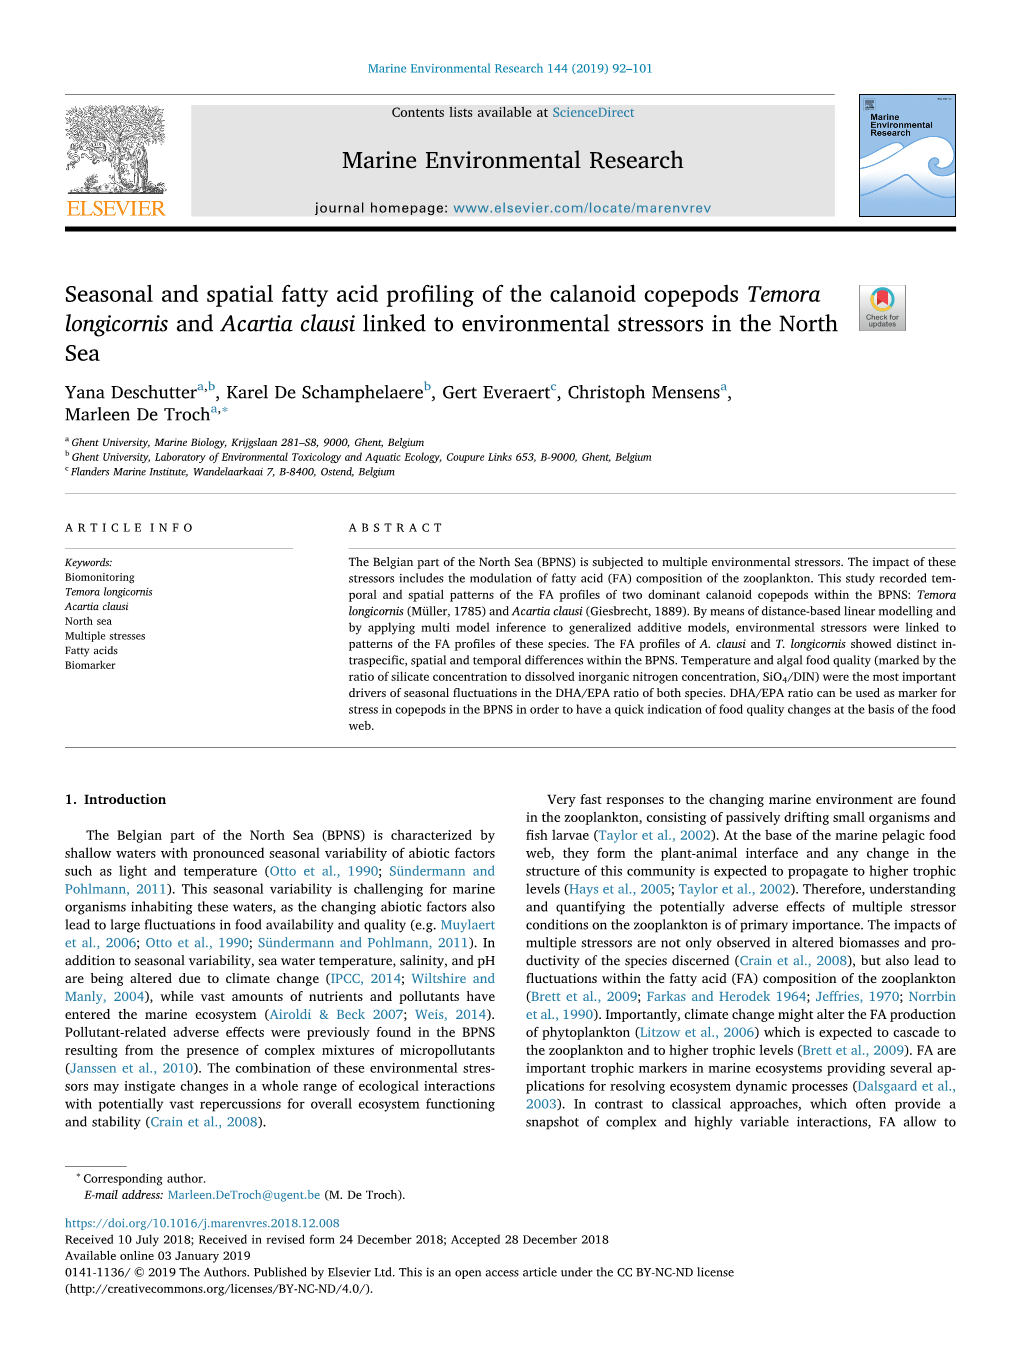 Seasonal and Spatial Fatty Acid Profiling of the Calanoid Copepods